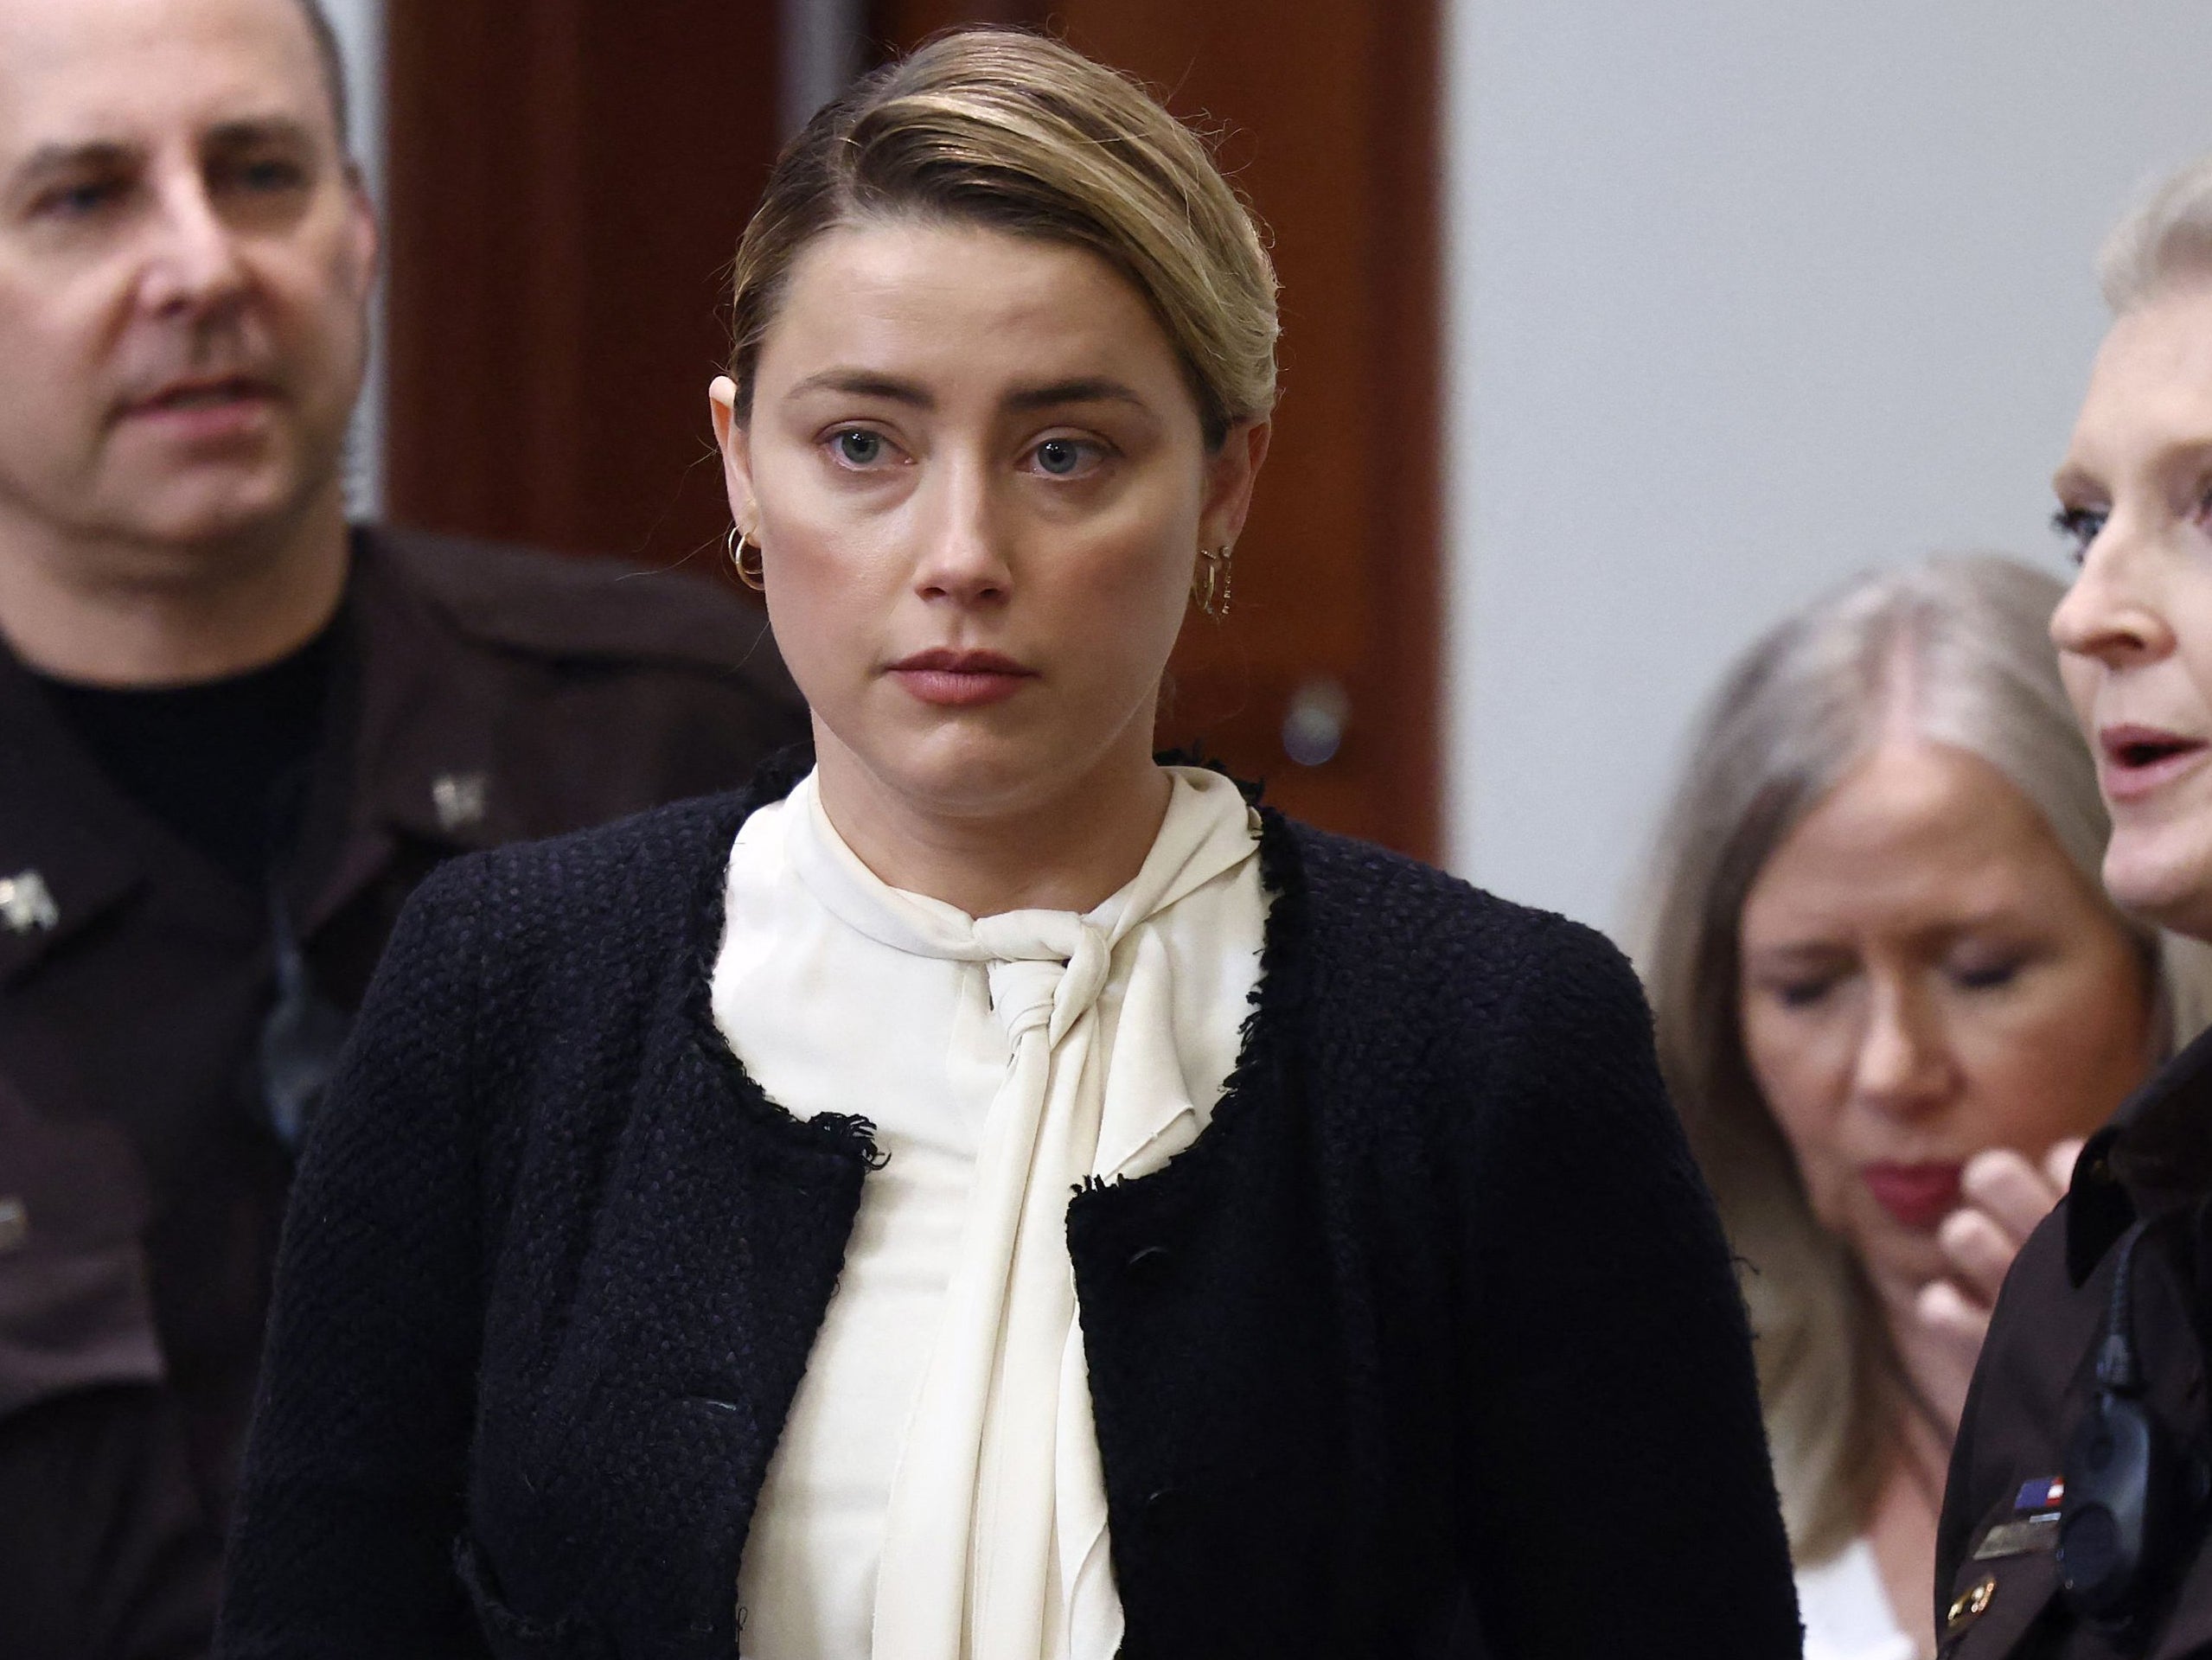 Amber Heard at the Fairfax County Courthouse in Fairfax, Virginia on 5 May 2022